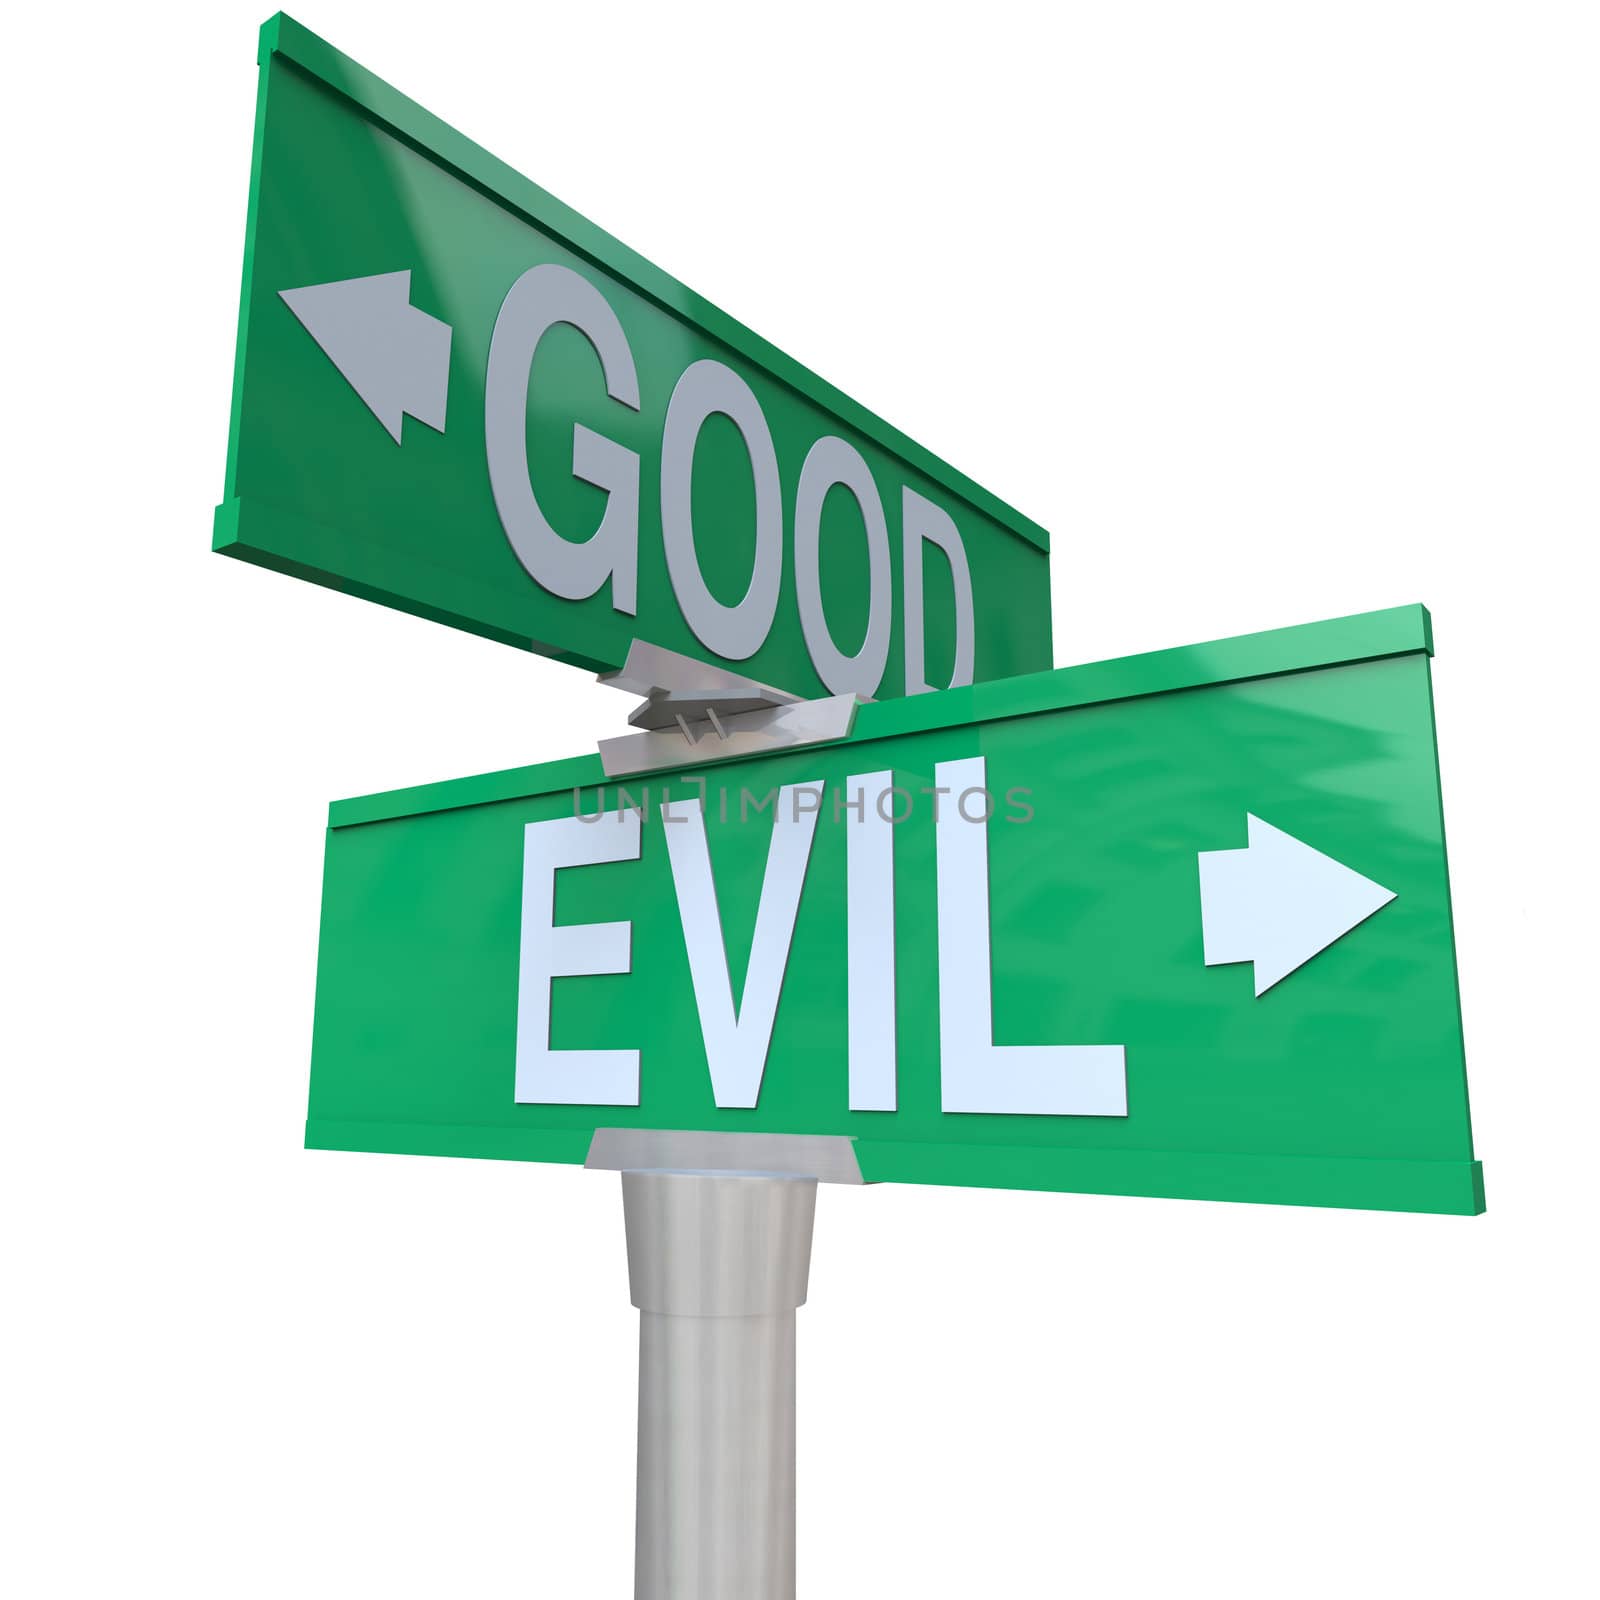 A green two-way street sign pointing to Good or Evil, symbolizing the inner conflict of the conscience